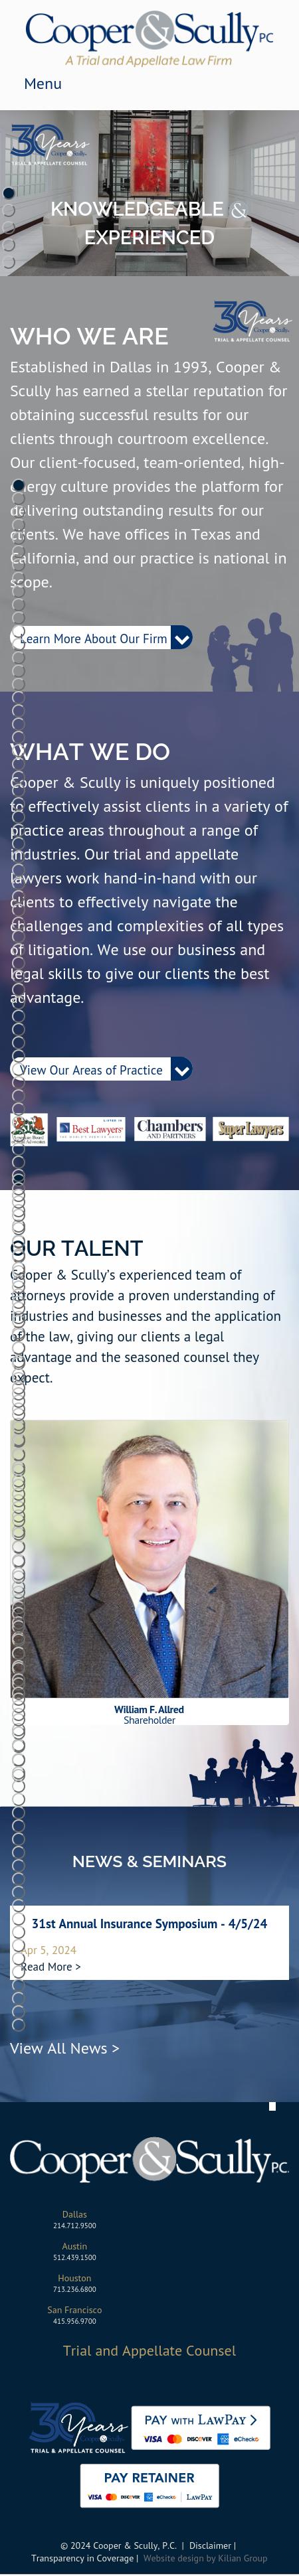 Cooper & Scully, P.C. - Houston TX Lawyers